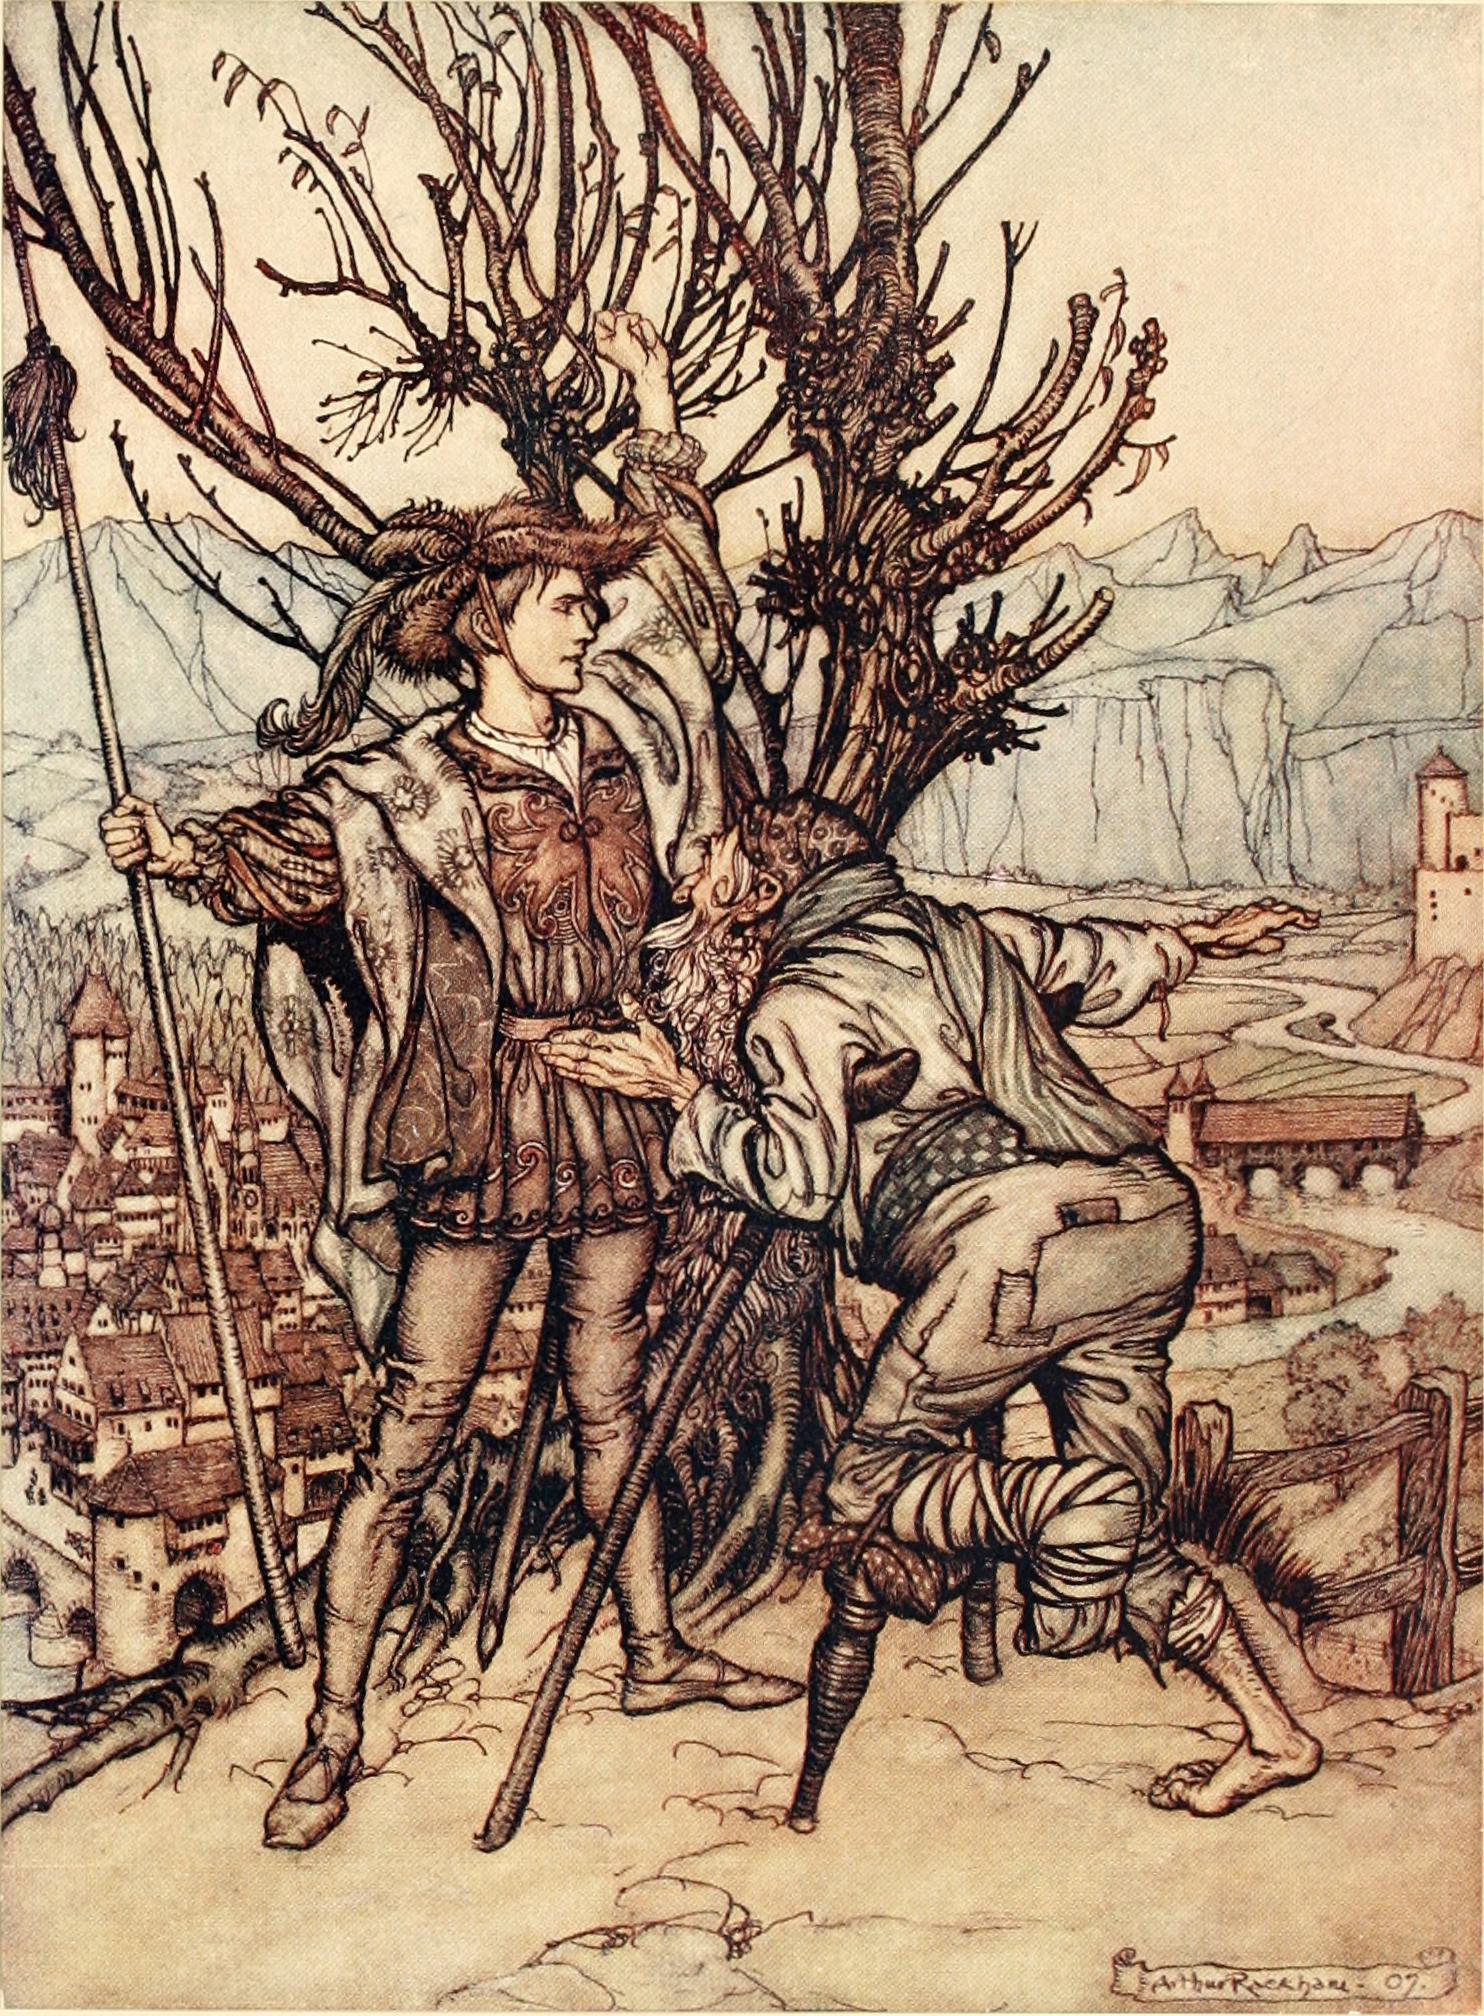 Illustration from The Fairy Tales of the Brothers Grimm